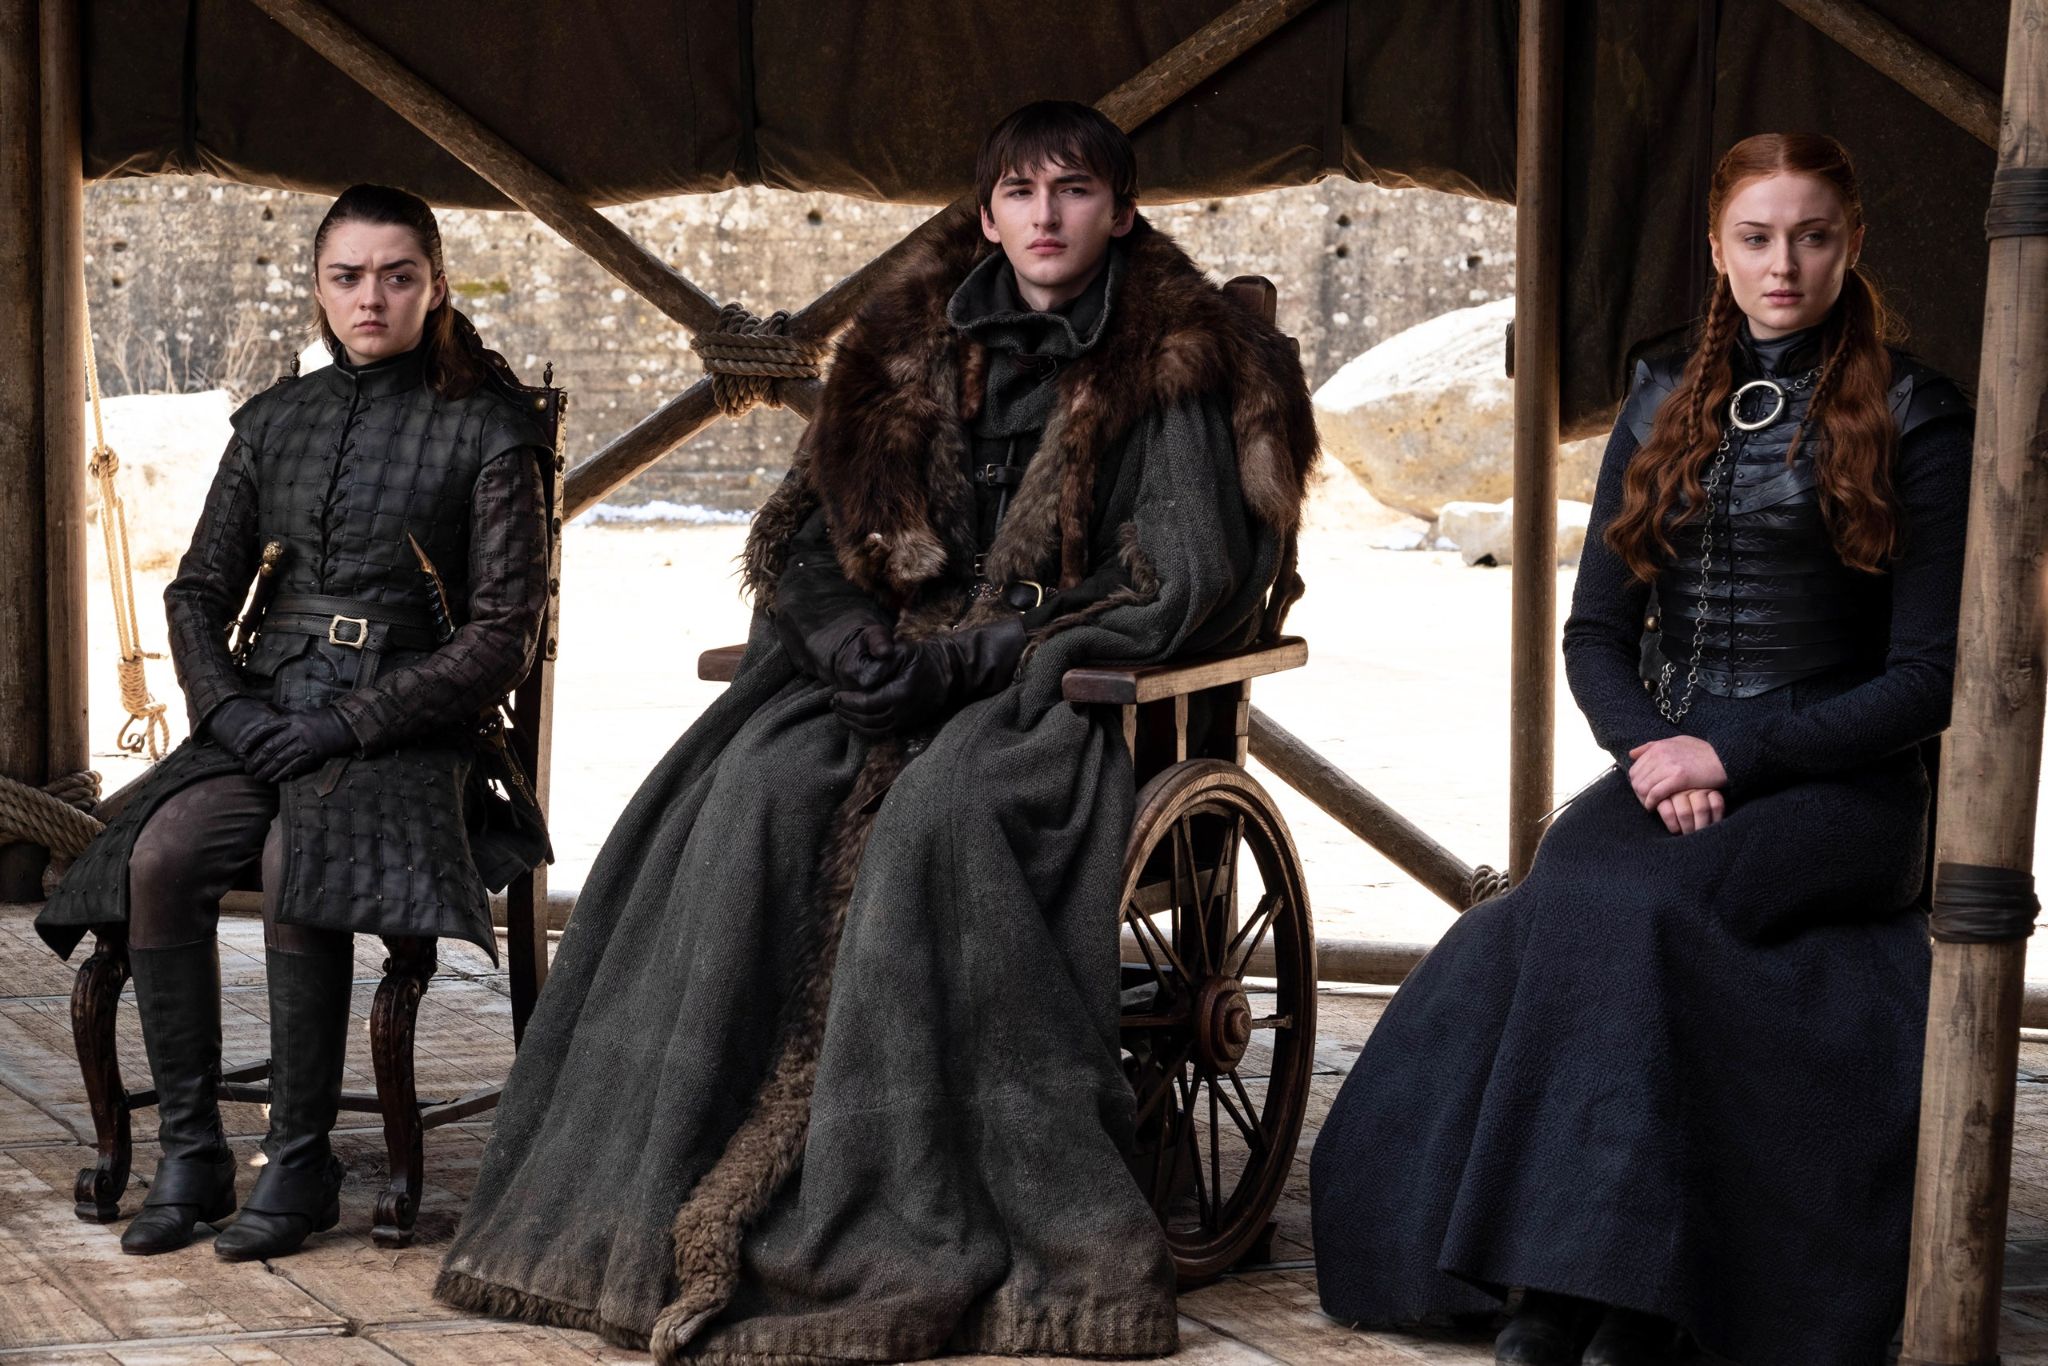 Discover Exclusive Secrets About the Game of Thrones Saga